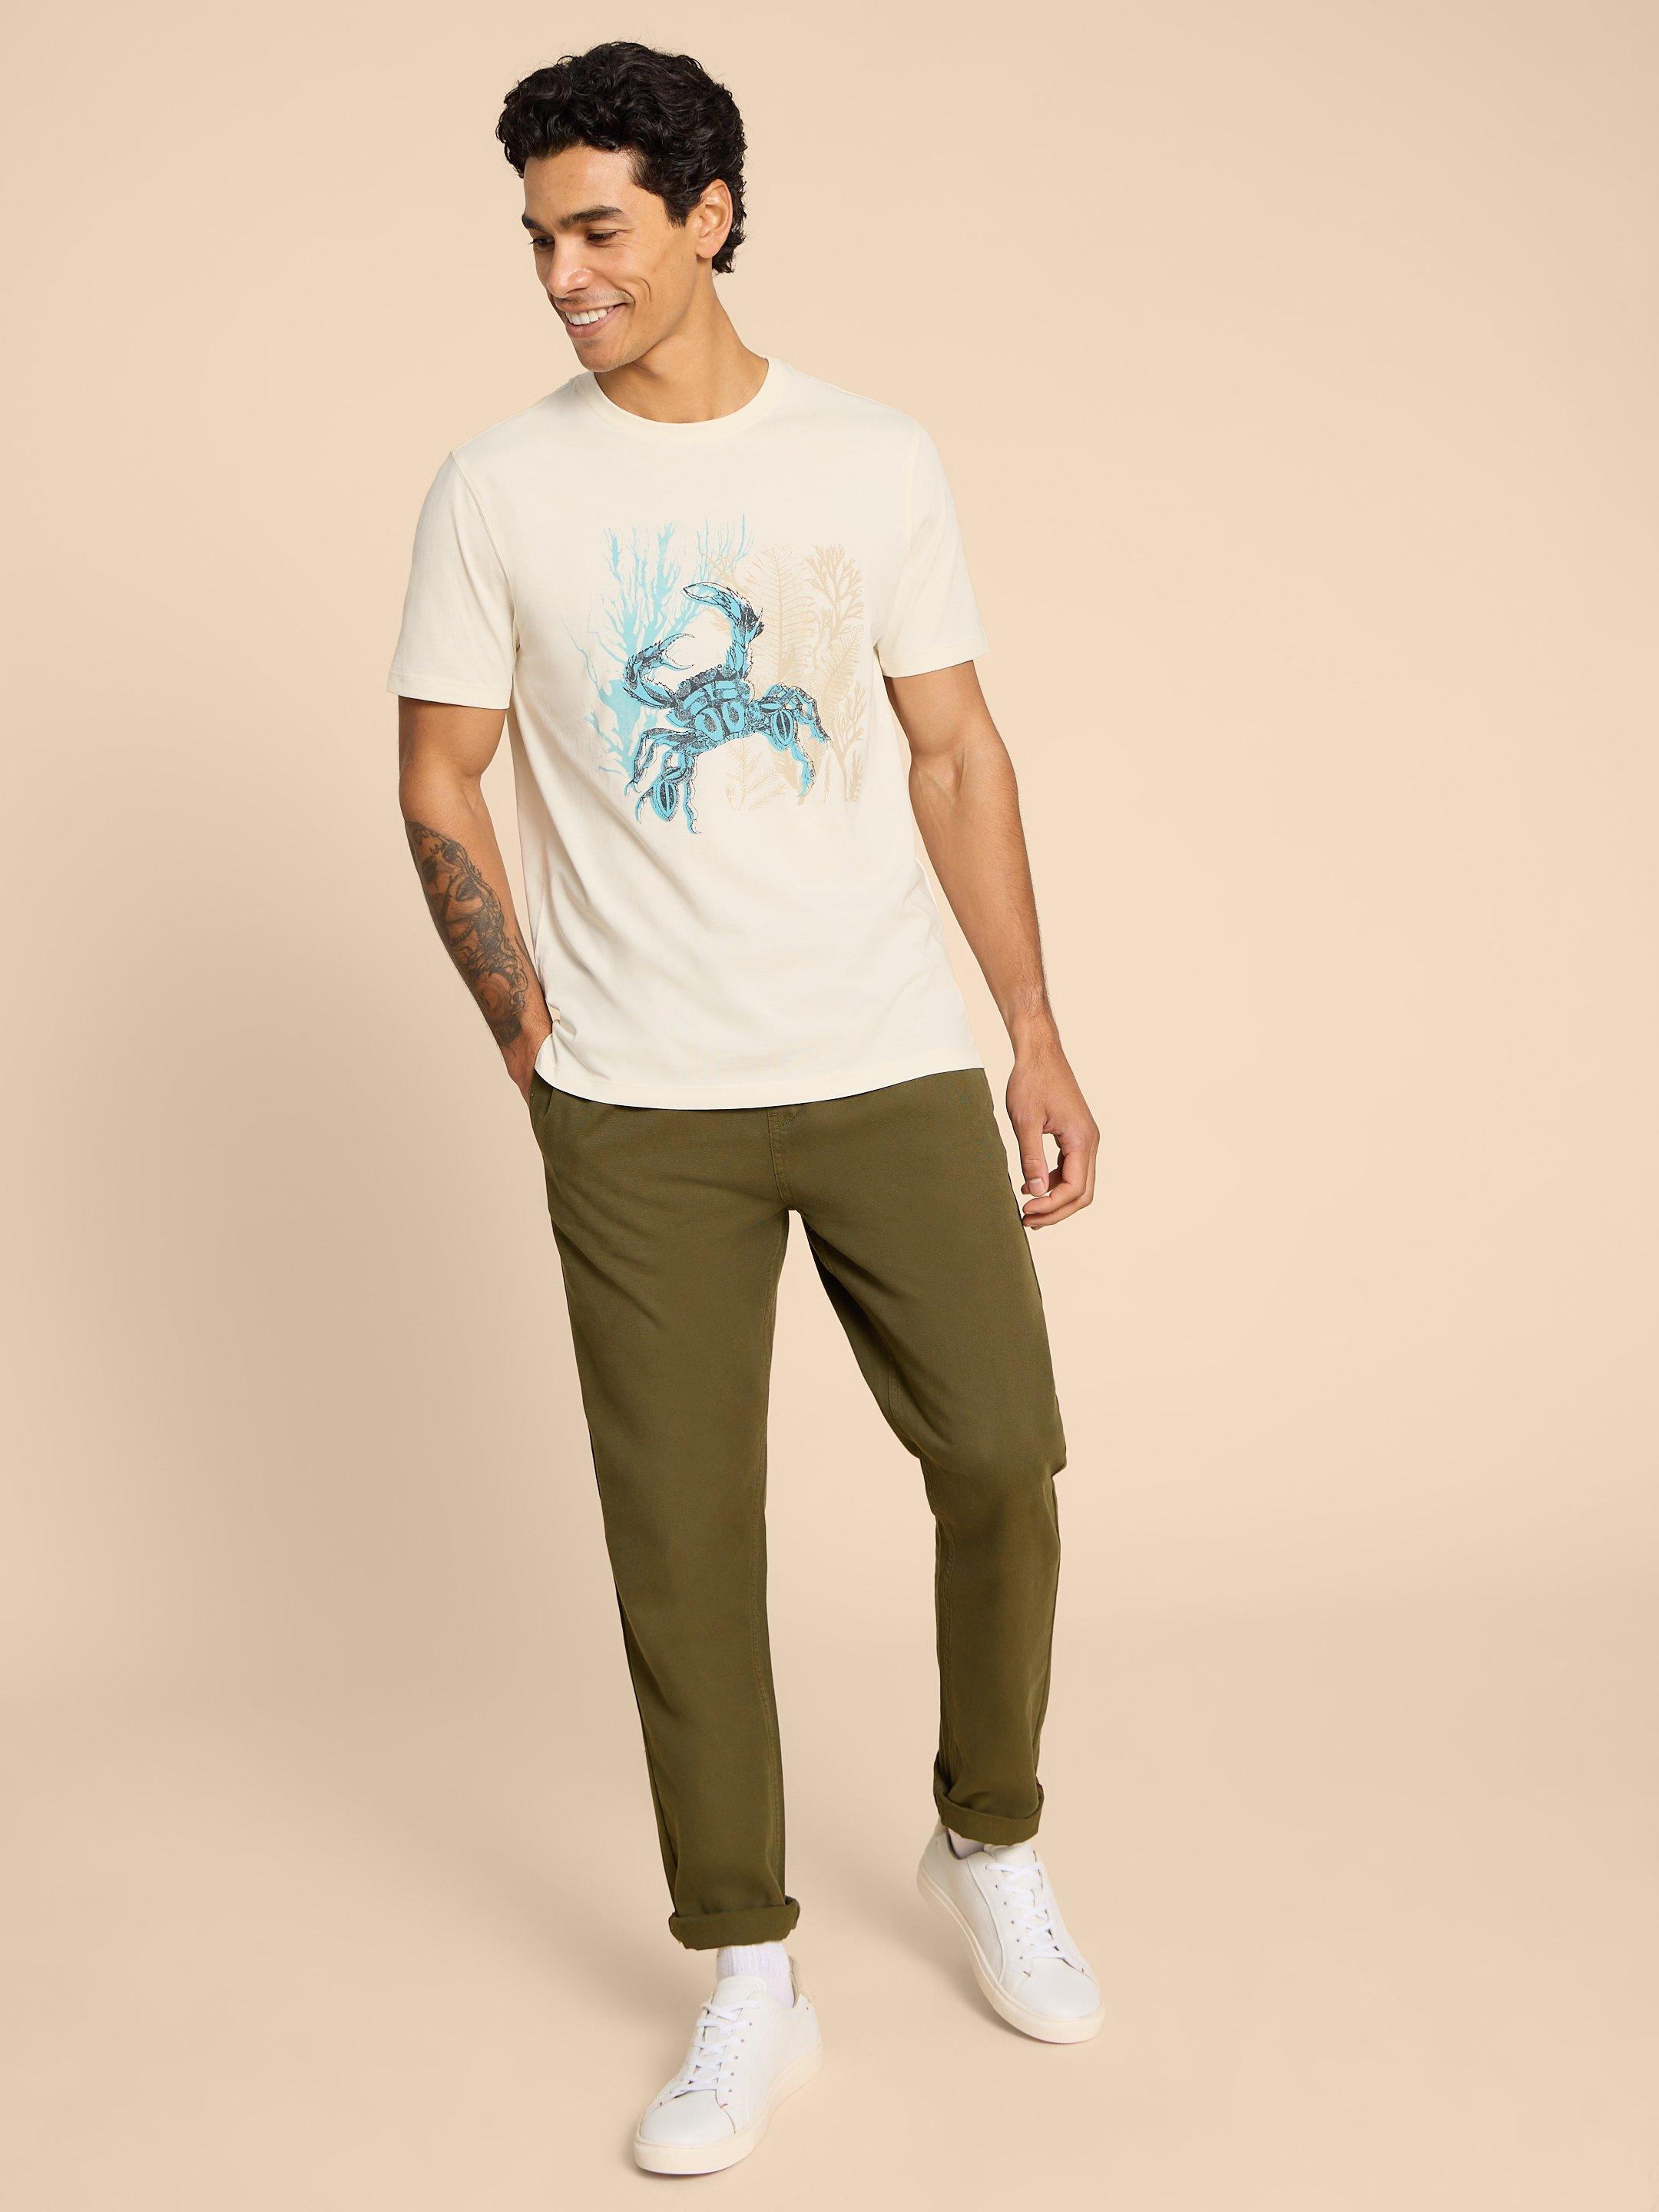 Crab Graphic Tee in WHITE PR - LIFESTYLE